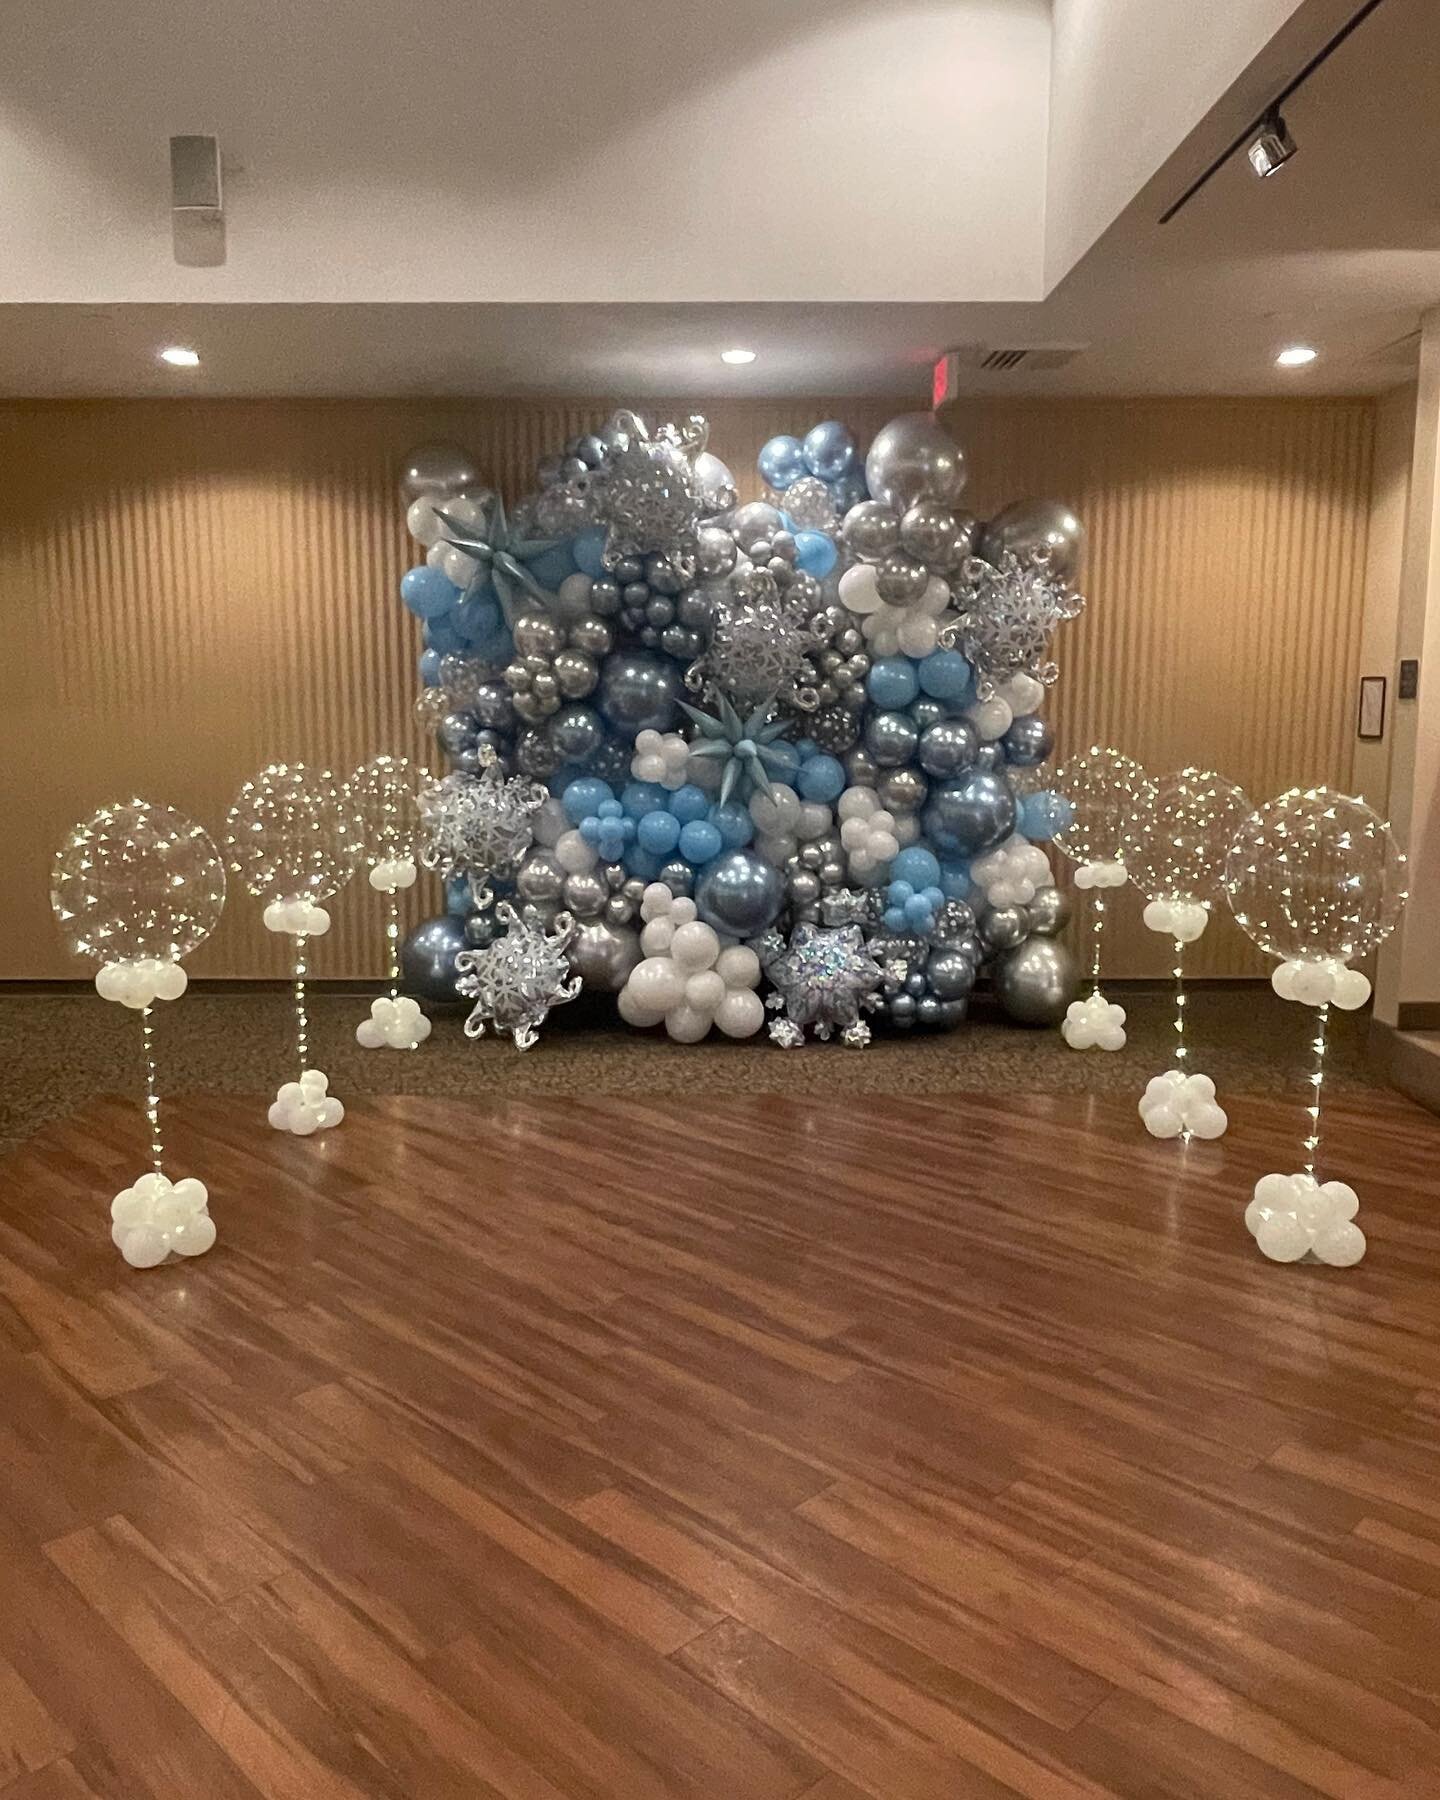 Daddy Daughter Dance - Snowball Theme ❄️❄️❄️❄️❄️❄️❄️❄️❄️❄️❄️❄️❄️

#balloons #balloonwall #balloondecor #decor #decorations #snowball #daddydaughterdance #dance #balloonwall @havin_a_party  @havinaparty @fitness.faith.foster @heart_to_table_eventsbyhe